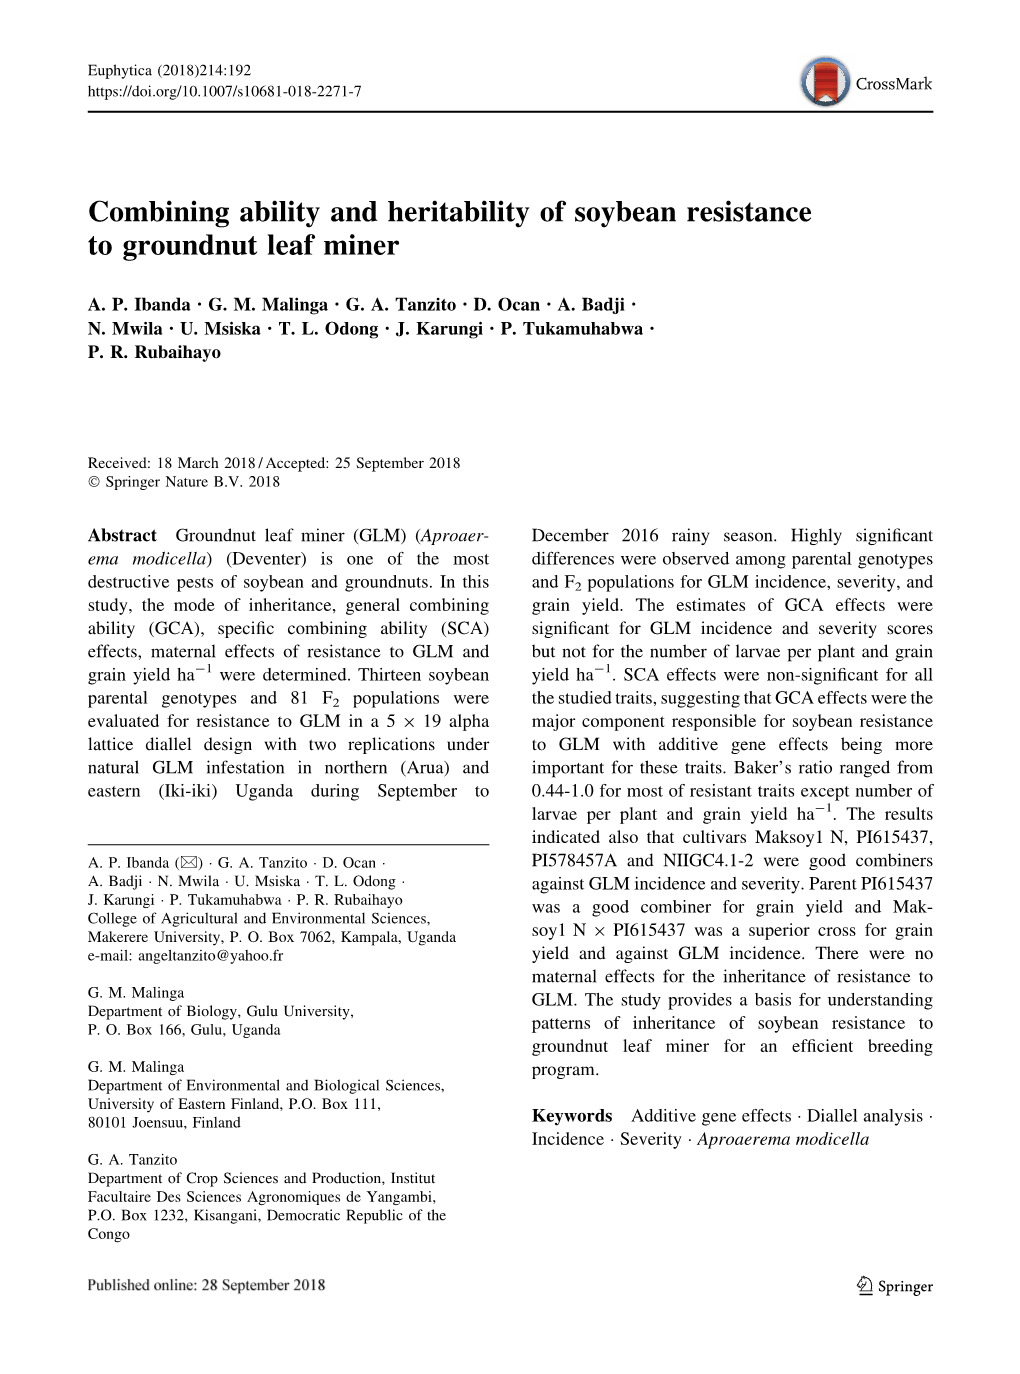 Combining Ability and Heritability of Soybean Resistance to Groundnut Leaf Miner